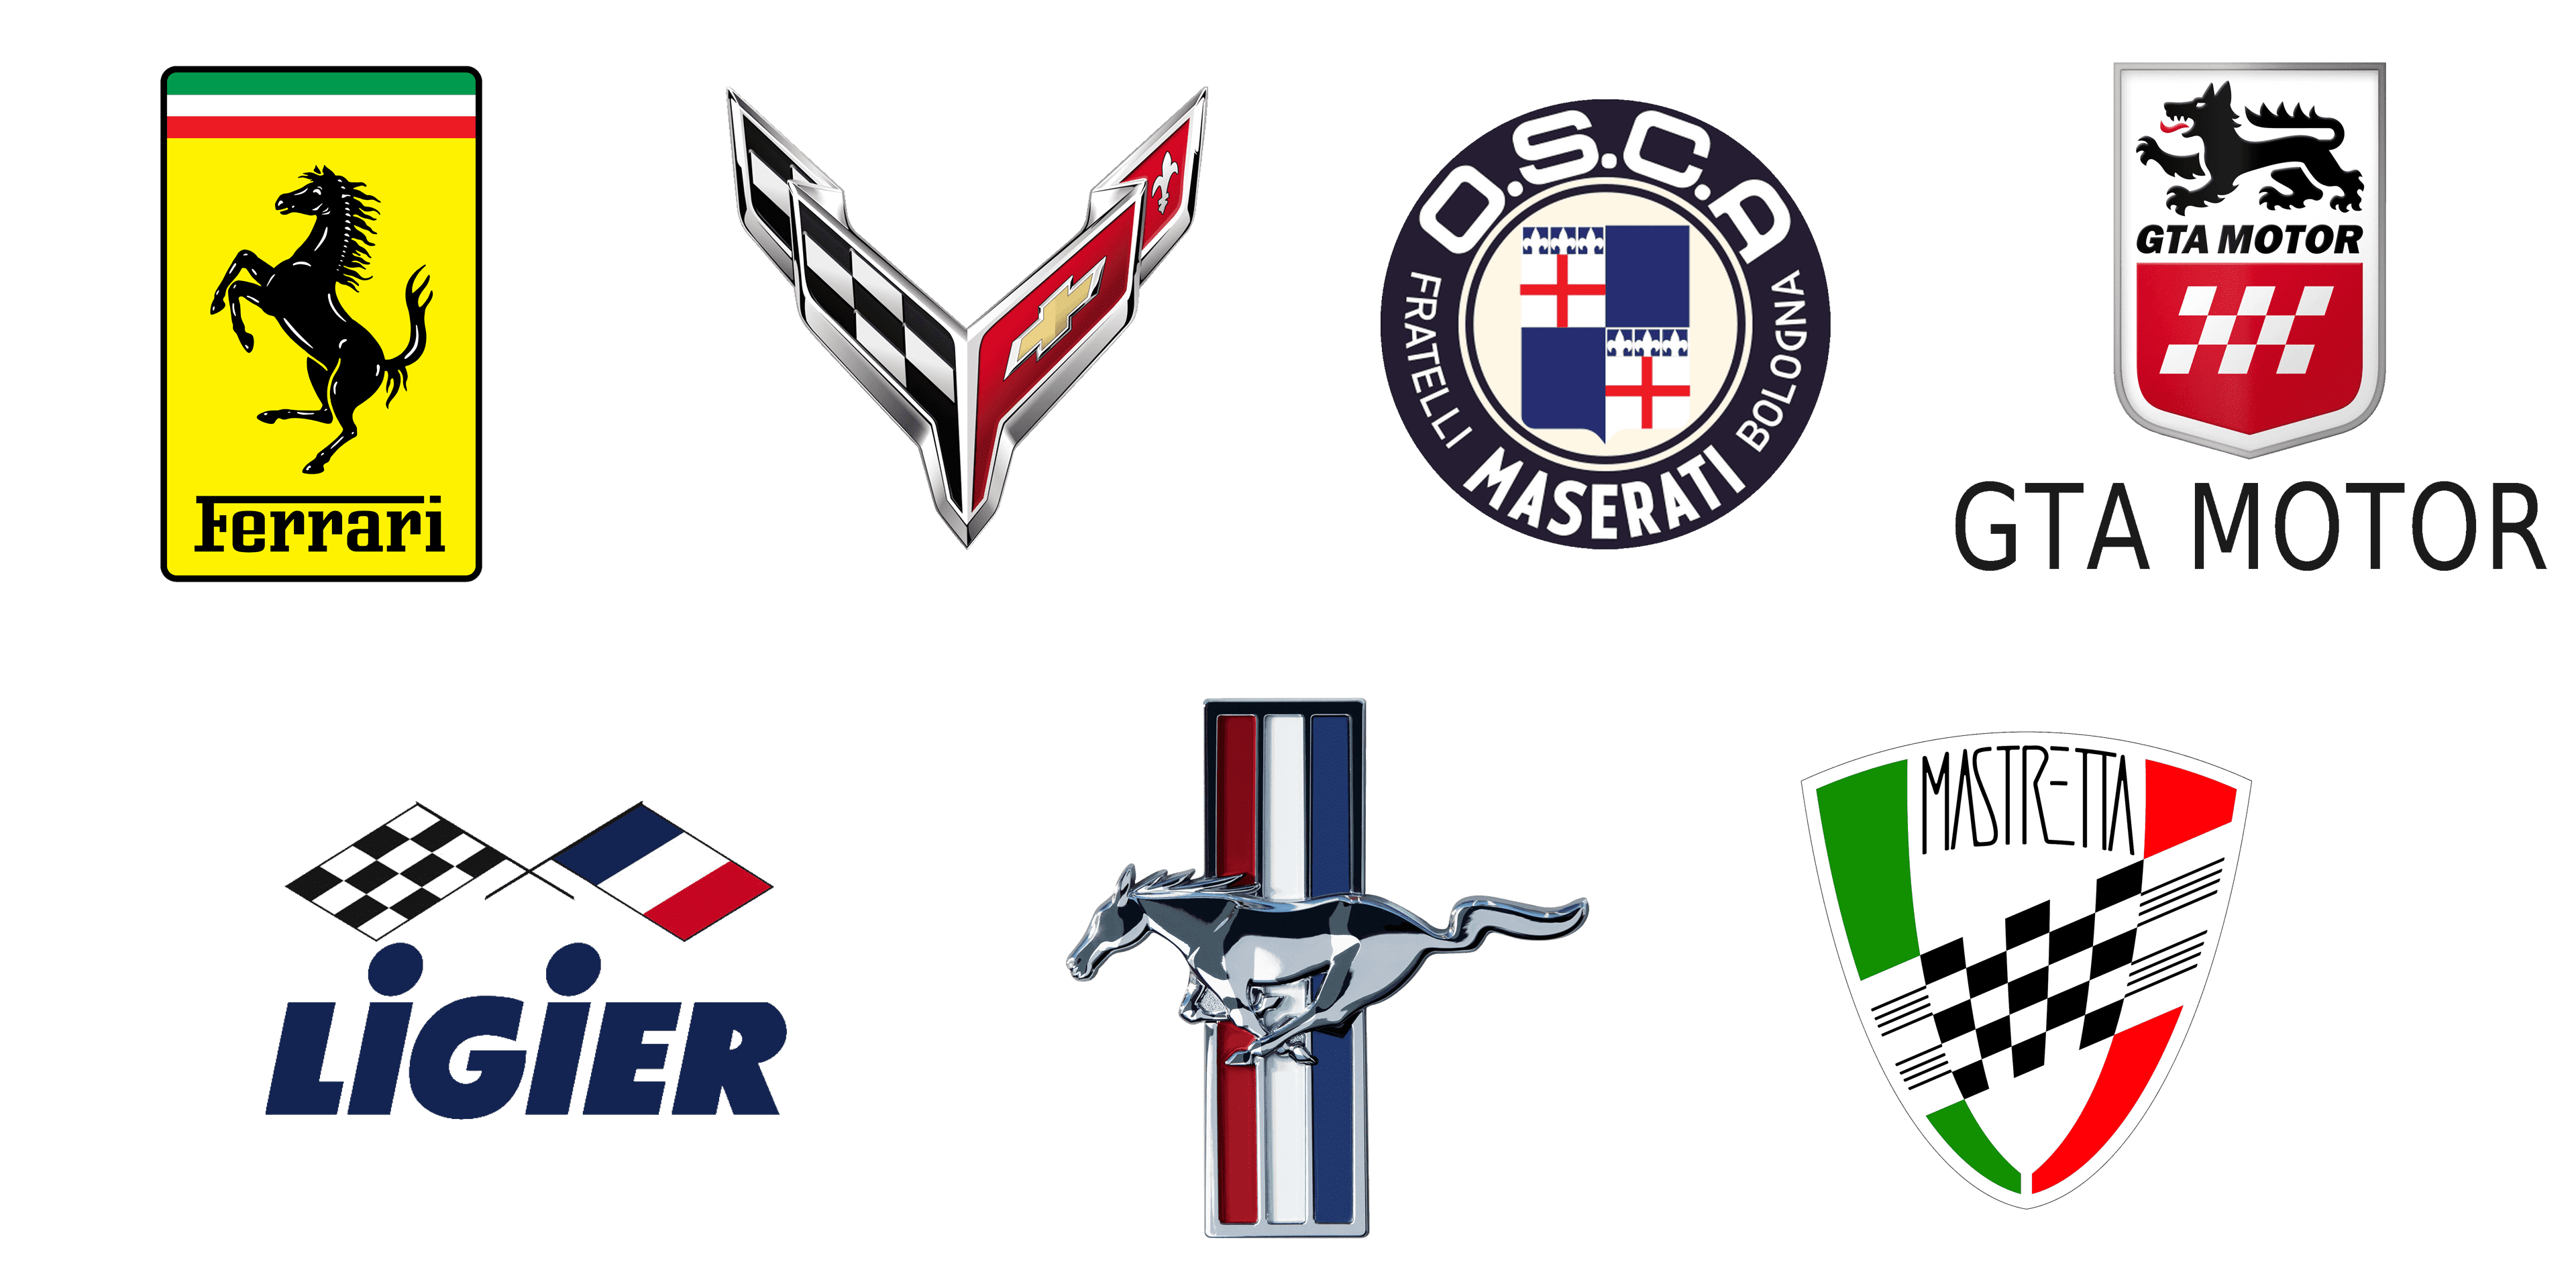 Car Badges and Logos With Flags